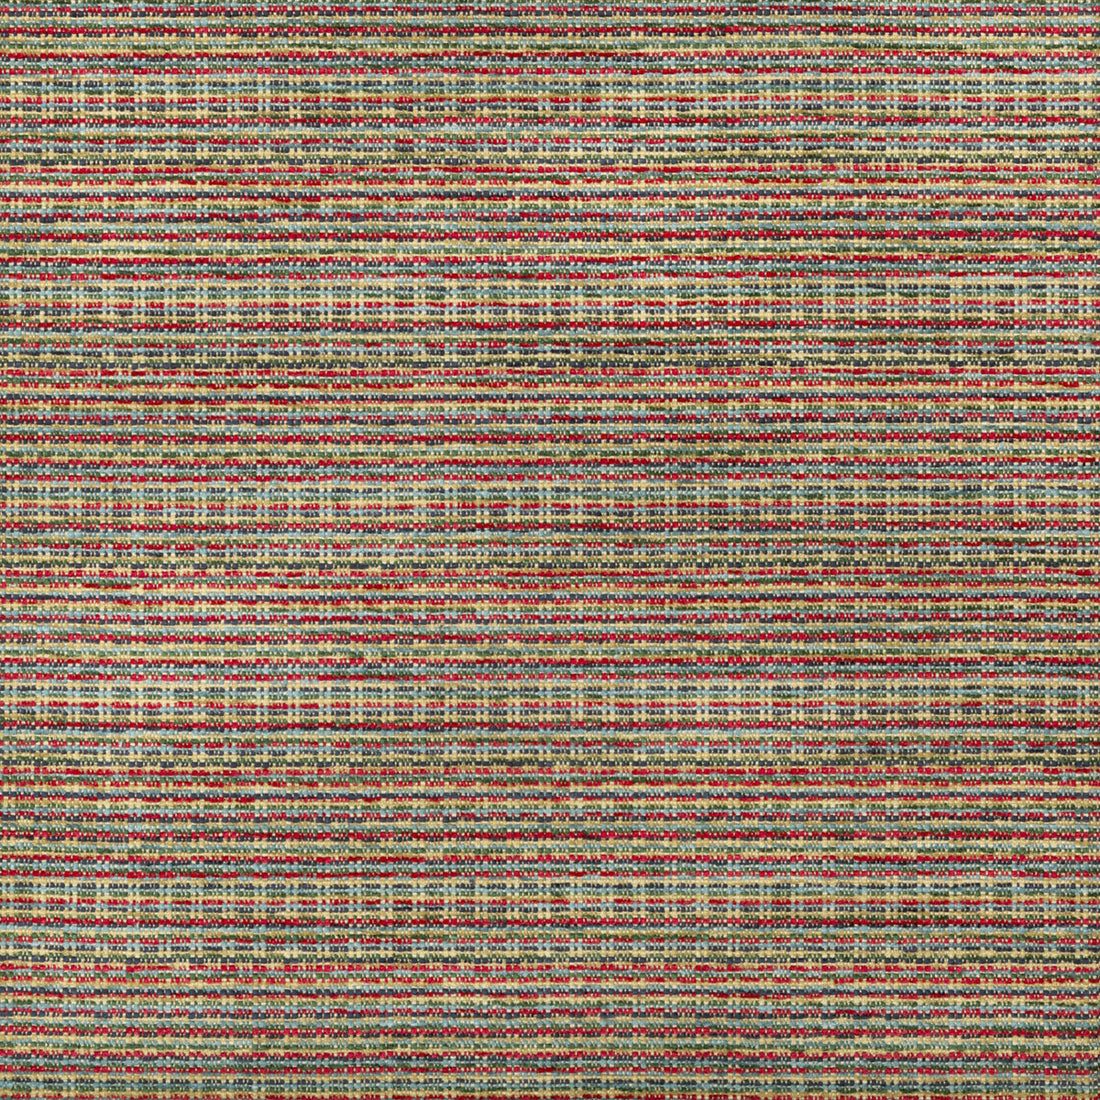 Orelle Texture fabric in multi color - pattern 8019148.253.0 - by Brunschwig &amp; Fils in the Chambery Textures II collection